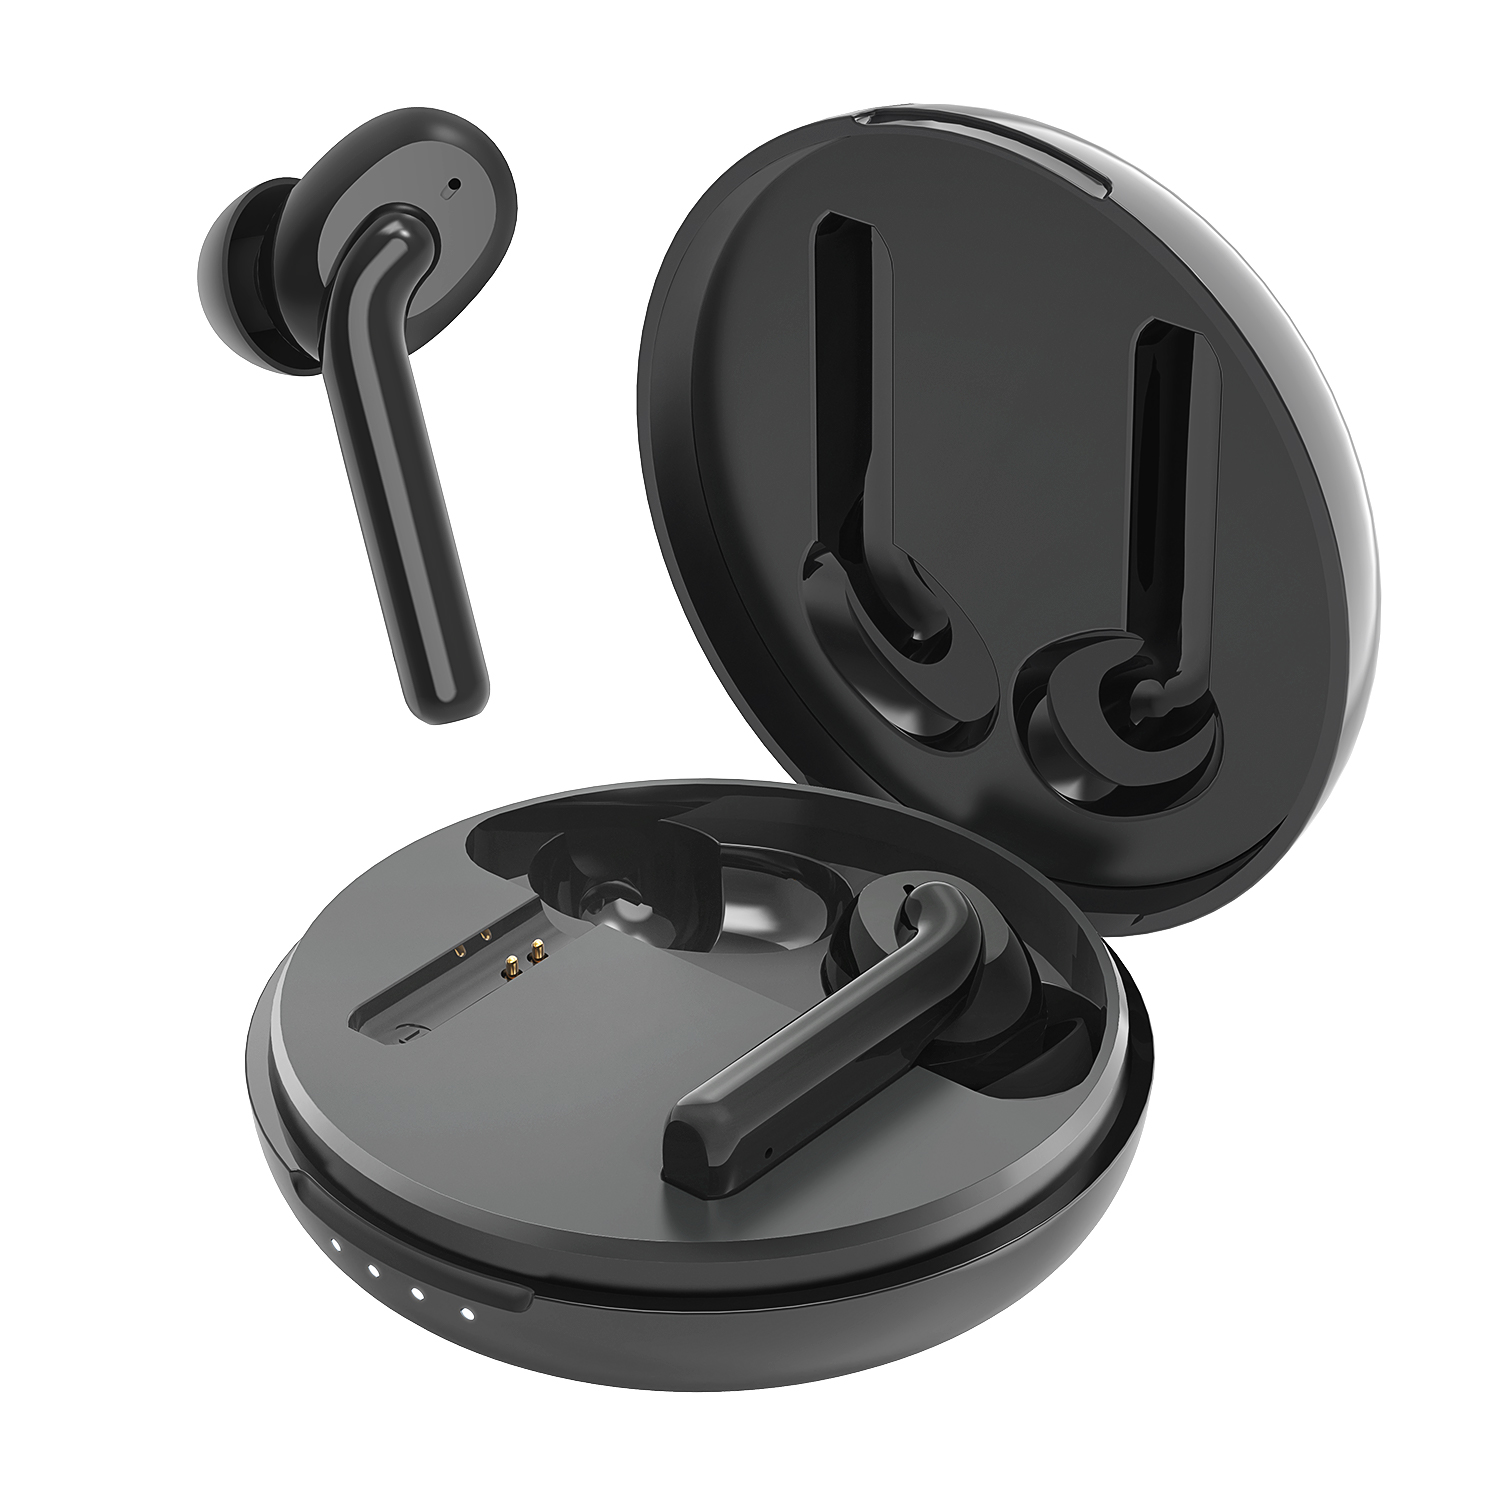 Wireless Earbuds, Bluetooth 5.0 in-Ear Headse with Hi-Fi Stereo, Touch Control True Wireless Headphones Built-in Mic, IPX7 Waterproof, 35 Hrs Playtime with Charging Case for iOS/Android Smart Phones - image 1 of 8